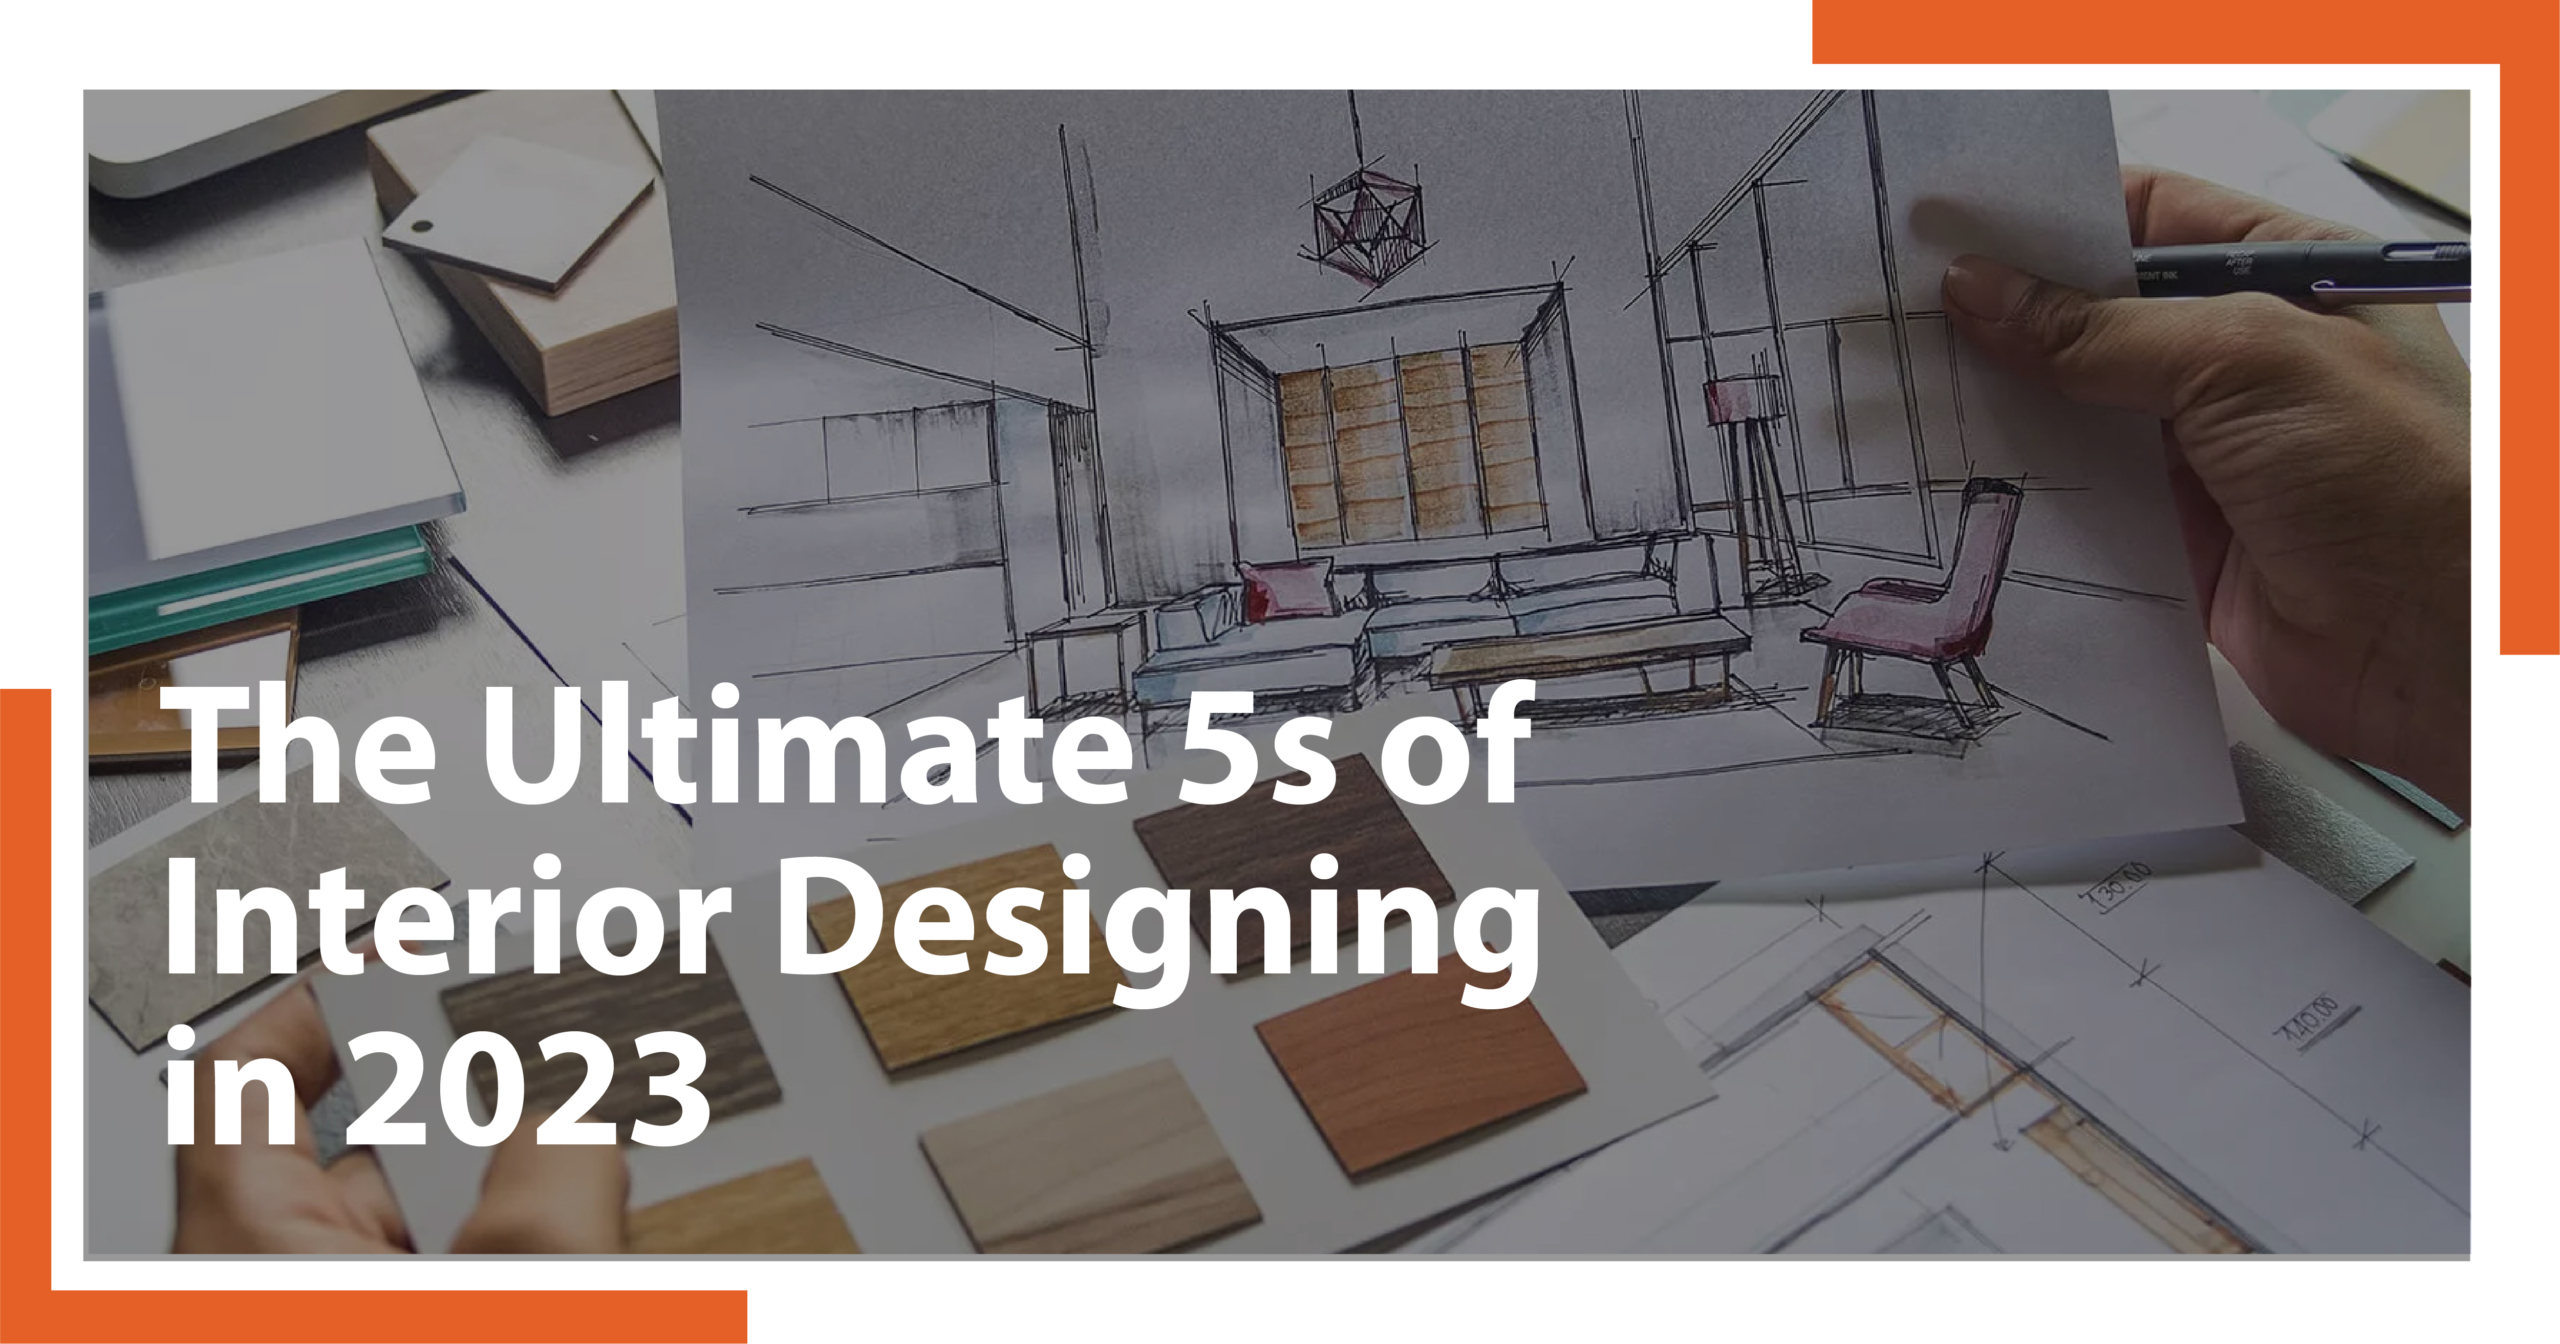 The ultimate guide to interior designing in 2023.